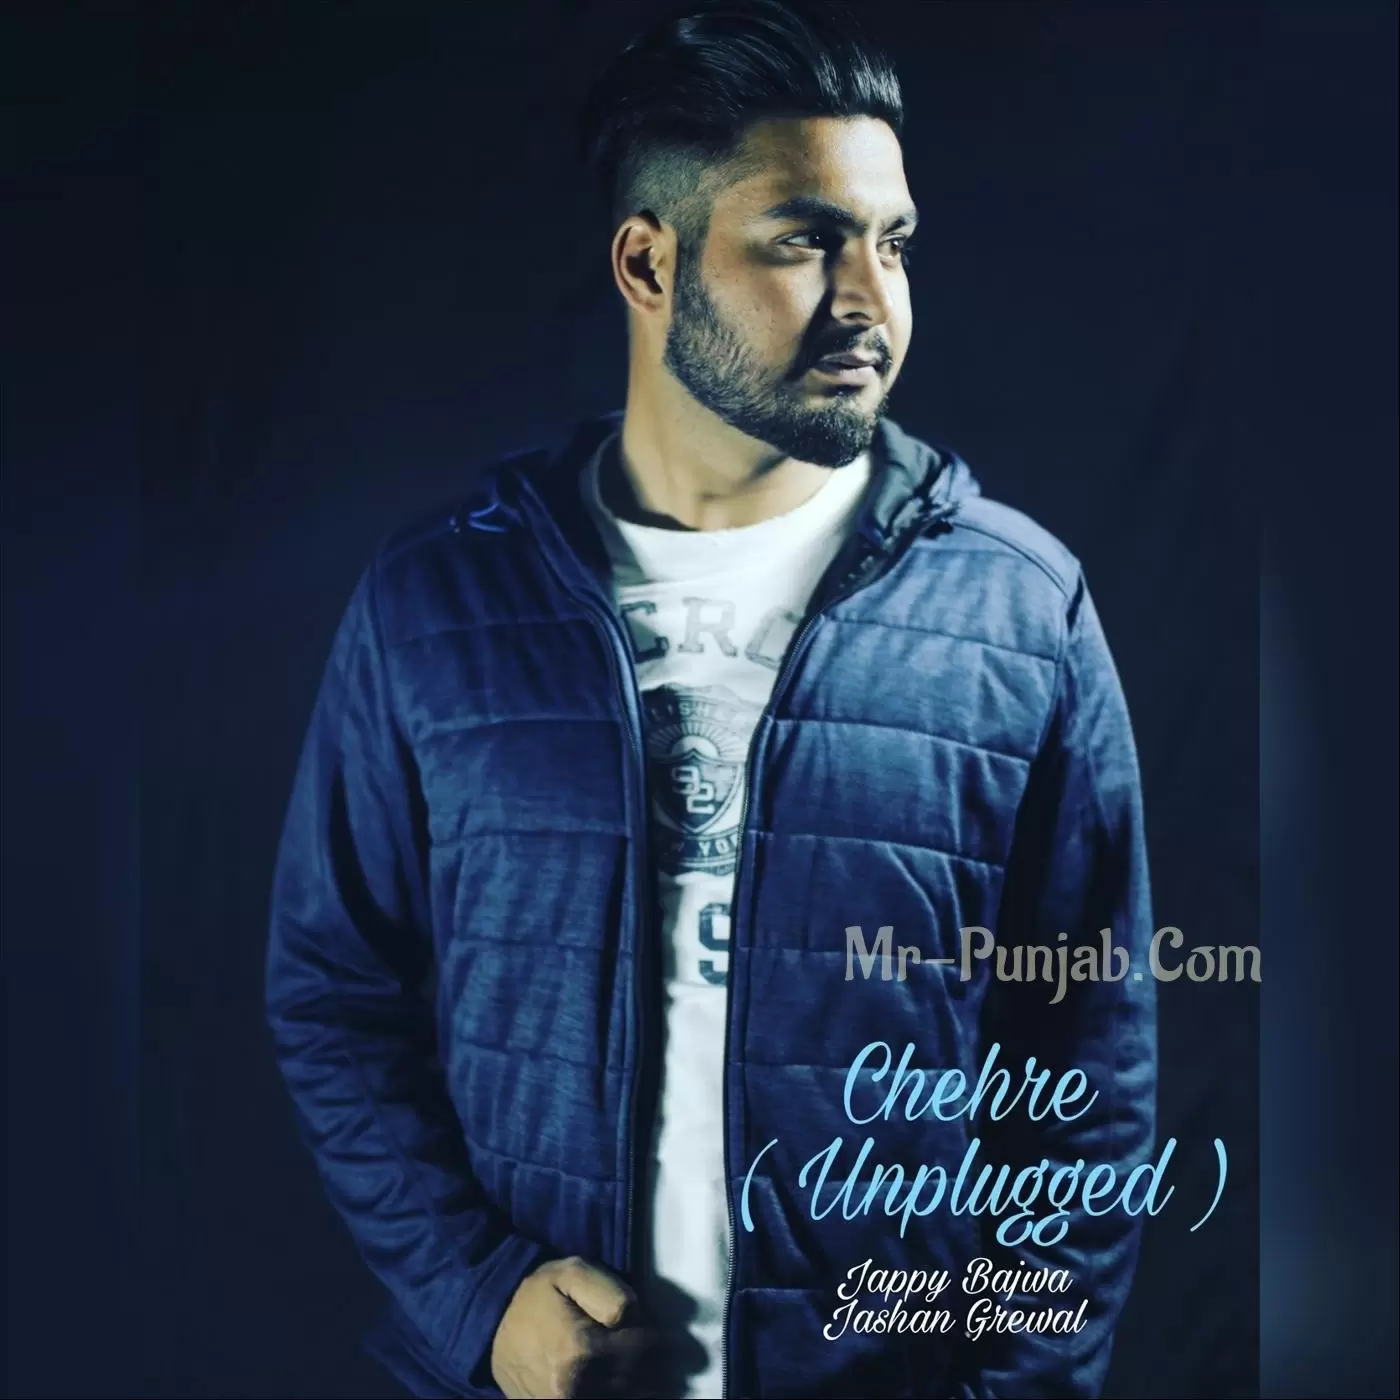 Chehre (unplugged) Jappy Bajwa Mp3 Download Song - Mr-Punjab